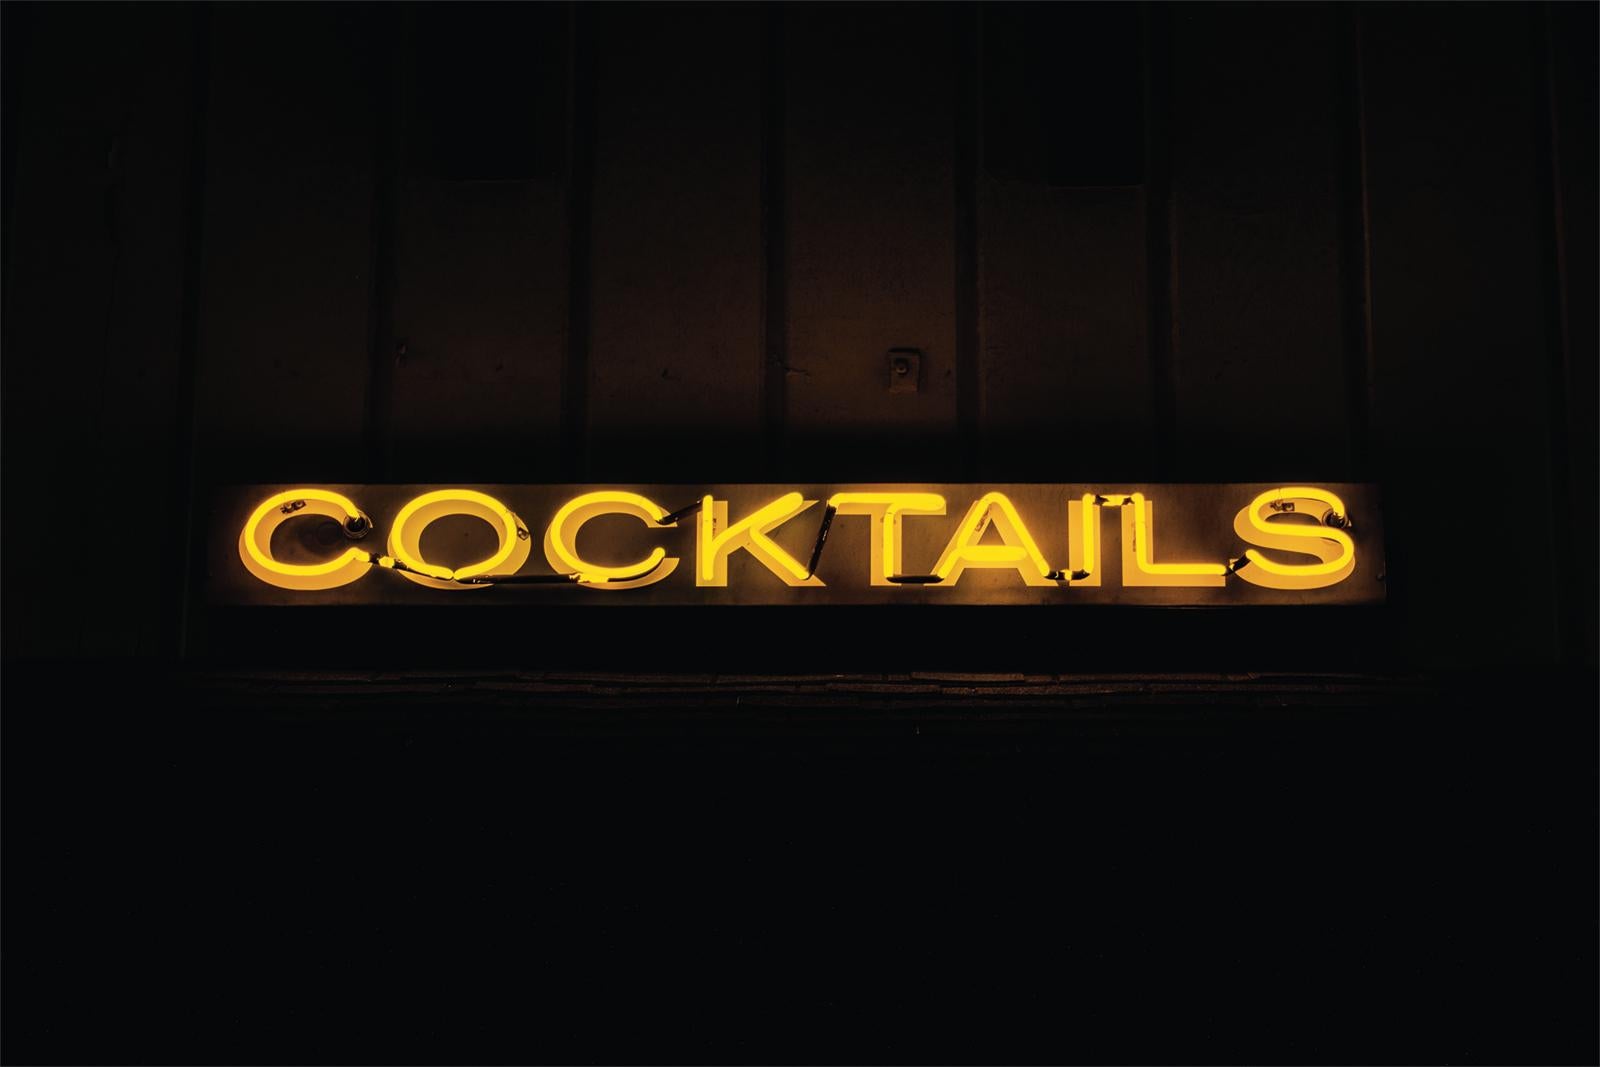 "Cocktails" Photography 30" x 40" inch Edition of 5 by Oleg Char

Medium: Hahnemühle Baryta Paper
Not framed. Ships in a tube. 

Other sizes available: 	
Edition of 5:	28.8" x 40" inch
Edition of 10:   23" x 32" inch
Edition of 20:	14.4" x 20"